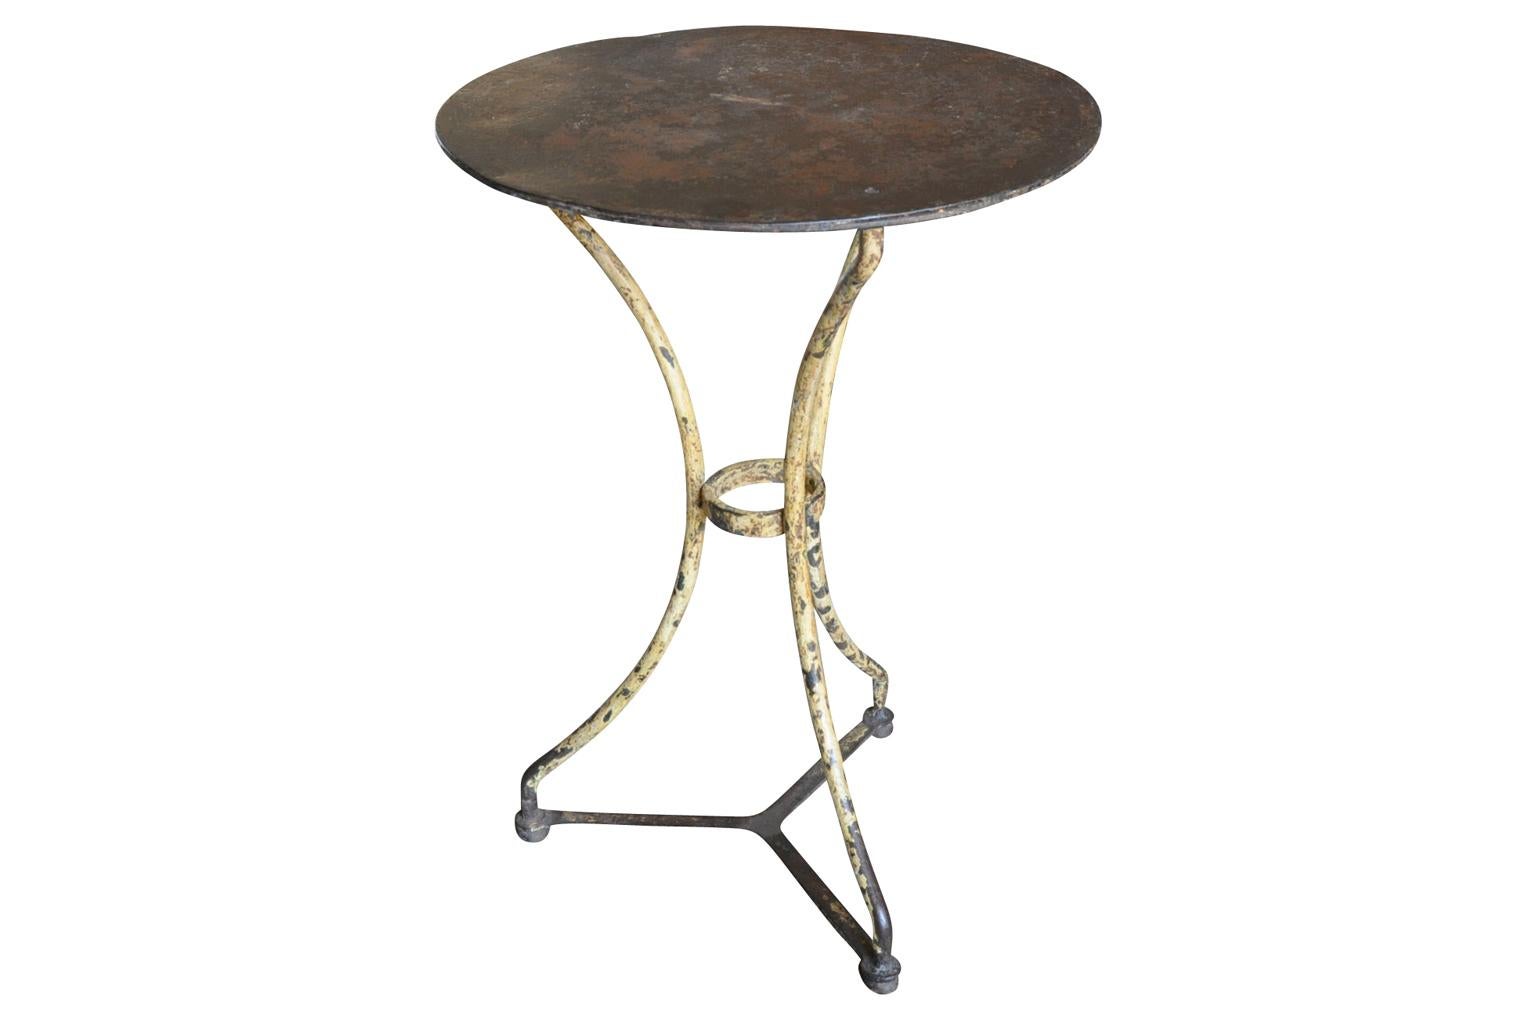 A very charming later 19th century bistro table from the Provence region of France. Soundly constructed from cast iron with its original paint. Terrific patina. A perfect accent piece for any interior or garden.